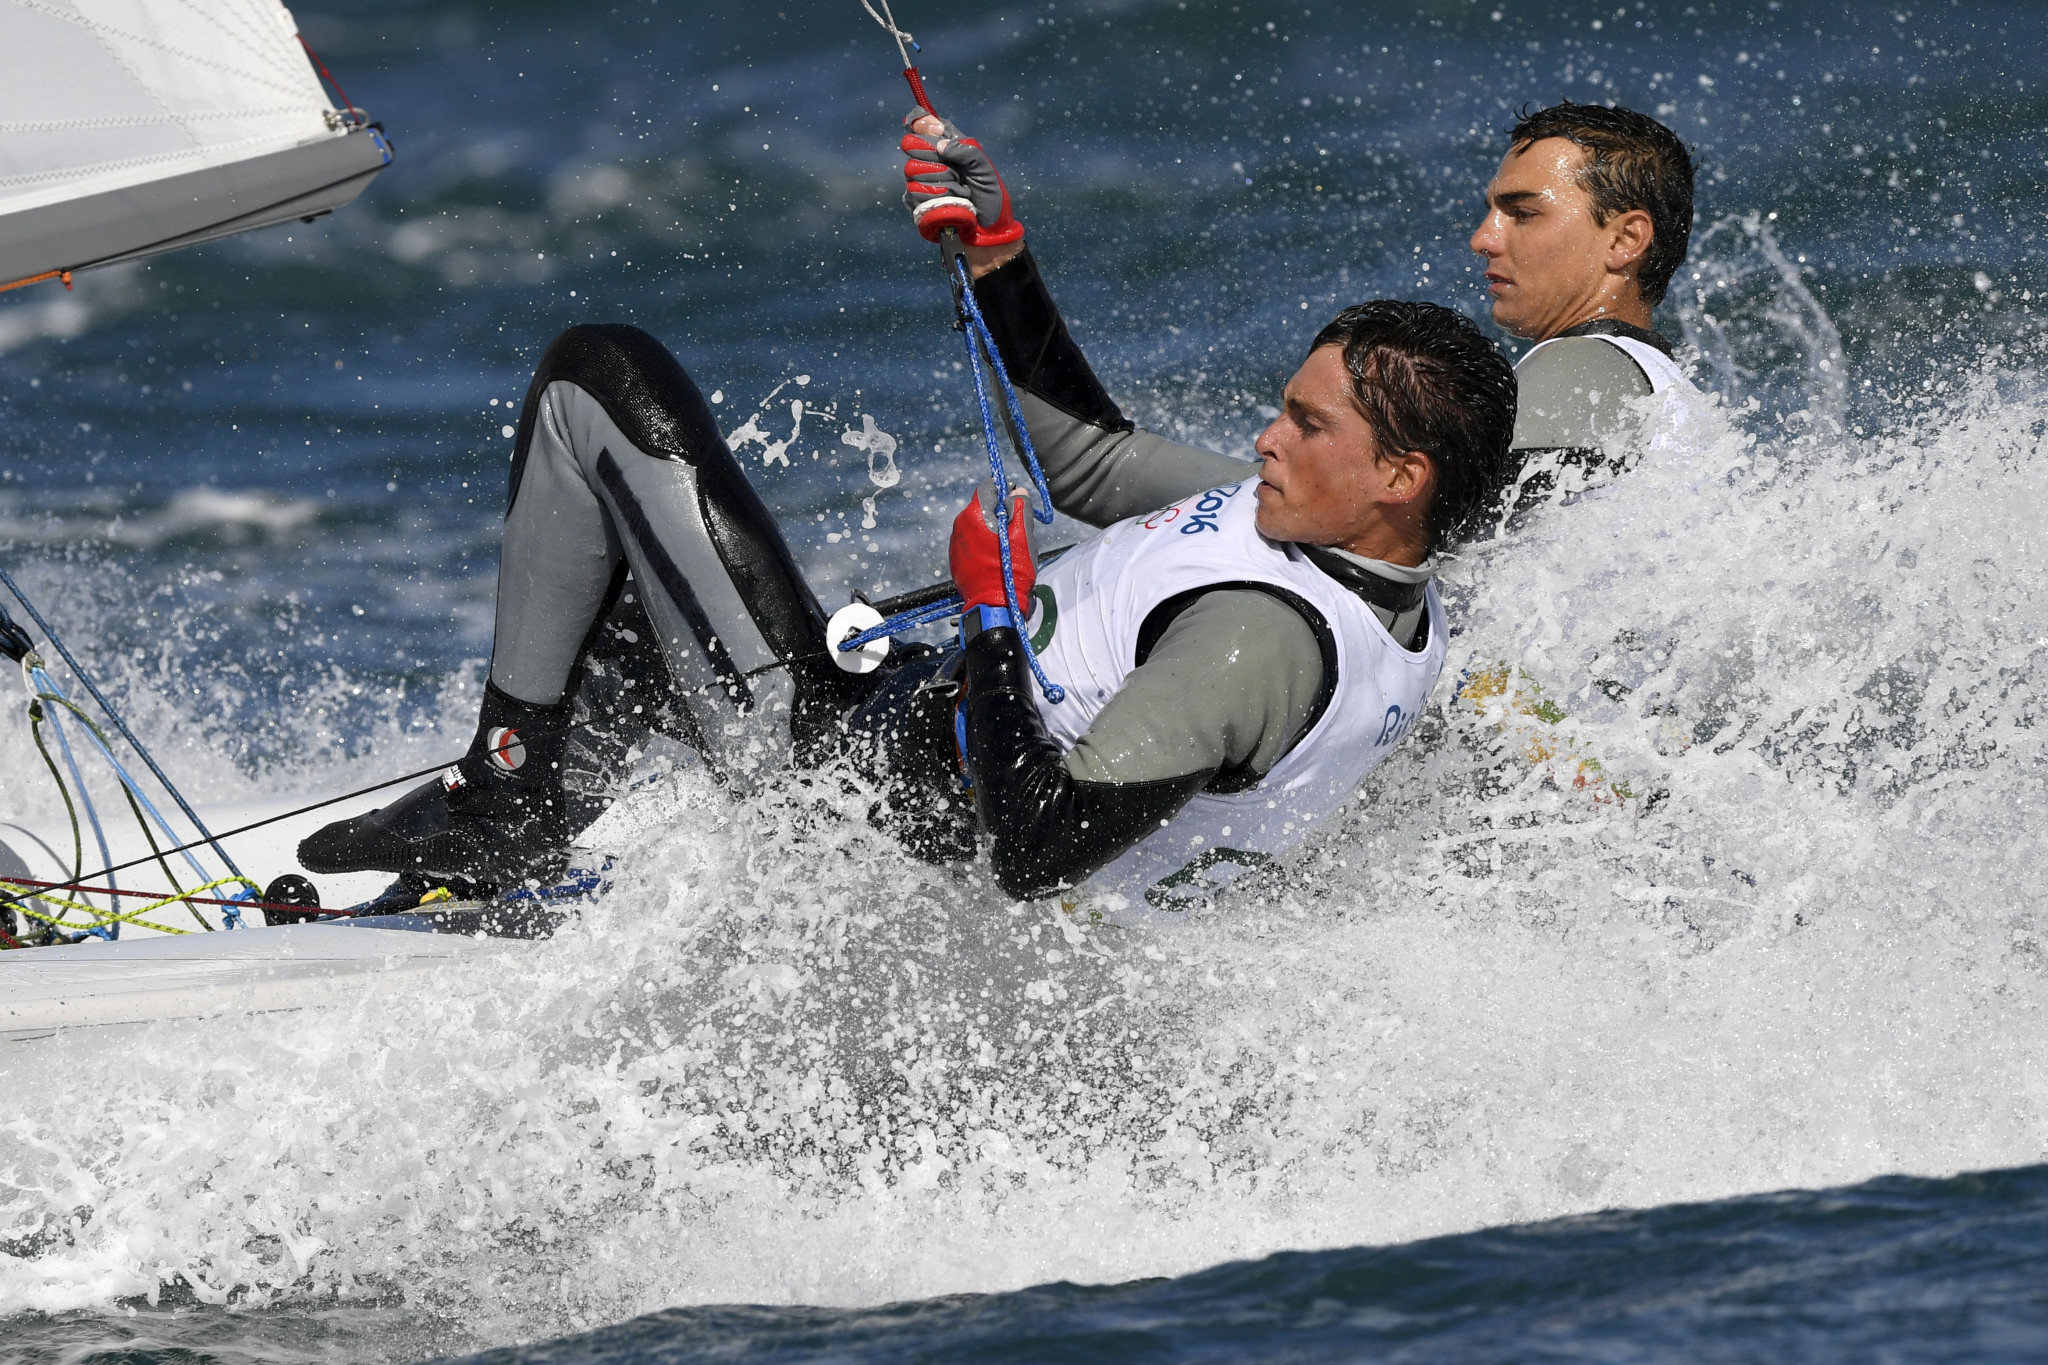 Medal race line-ups and Tokyo 2020 nation qualification decided at 470 World Championships